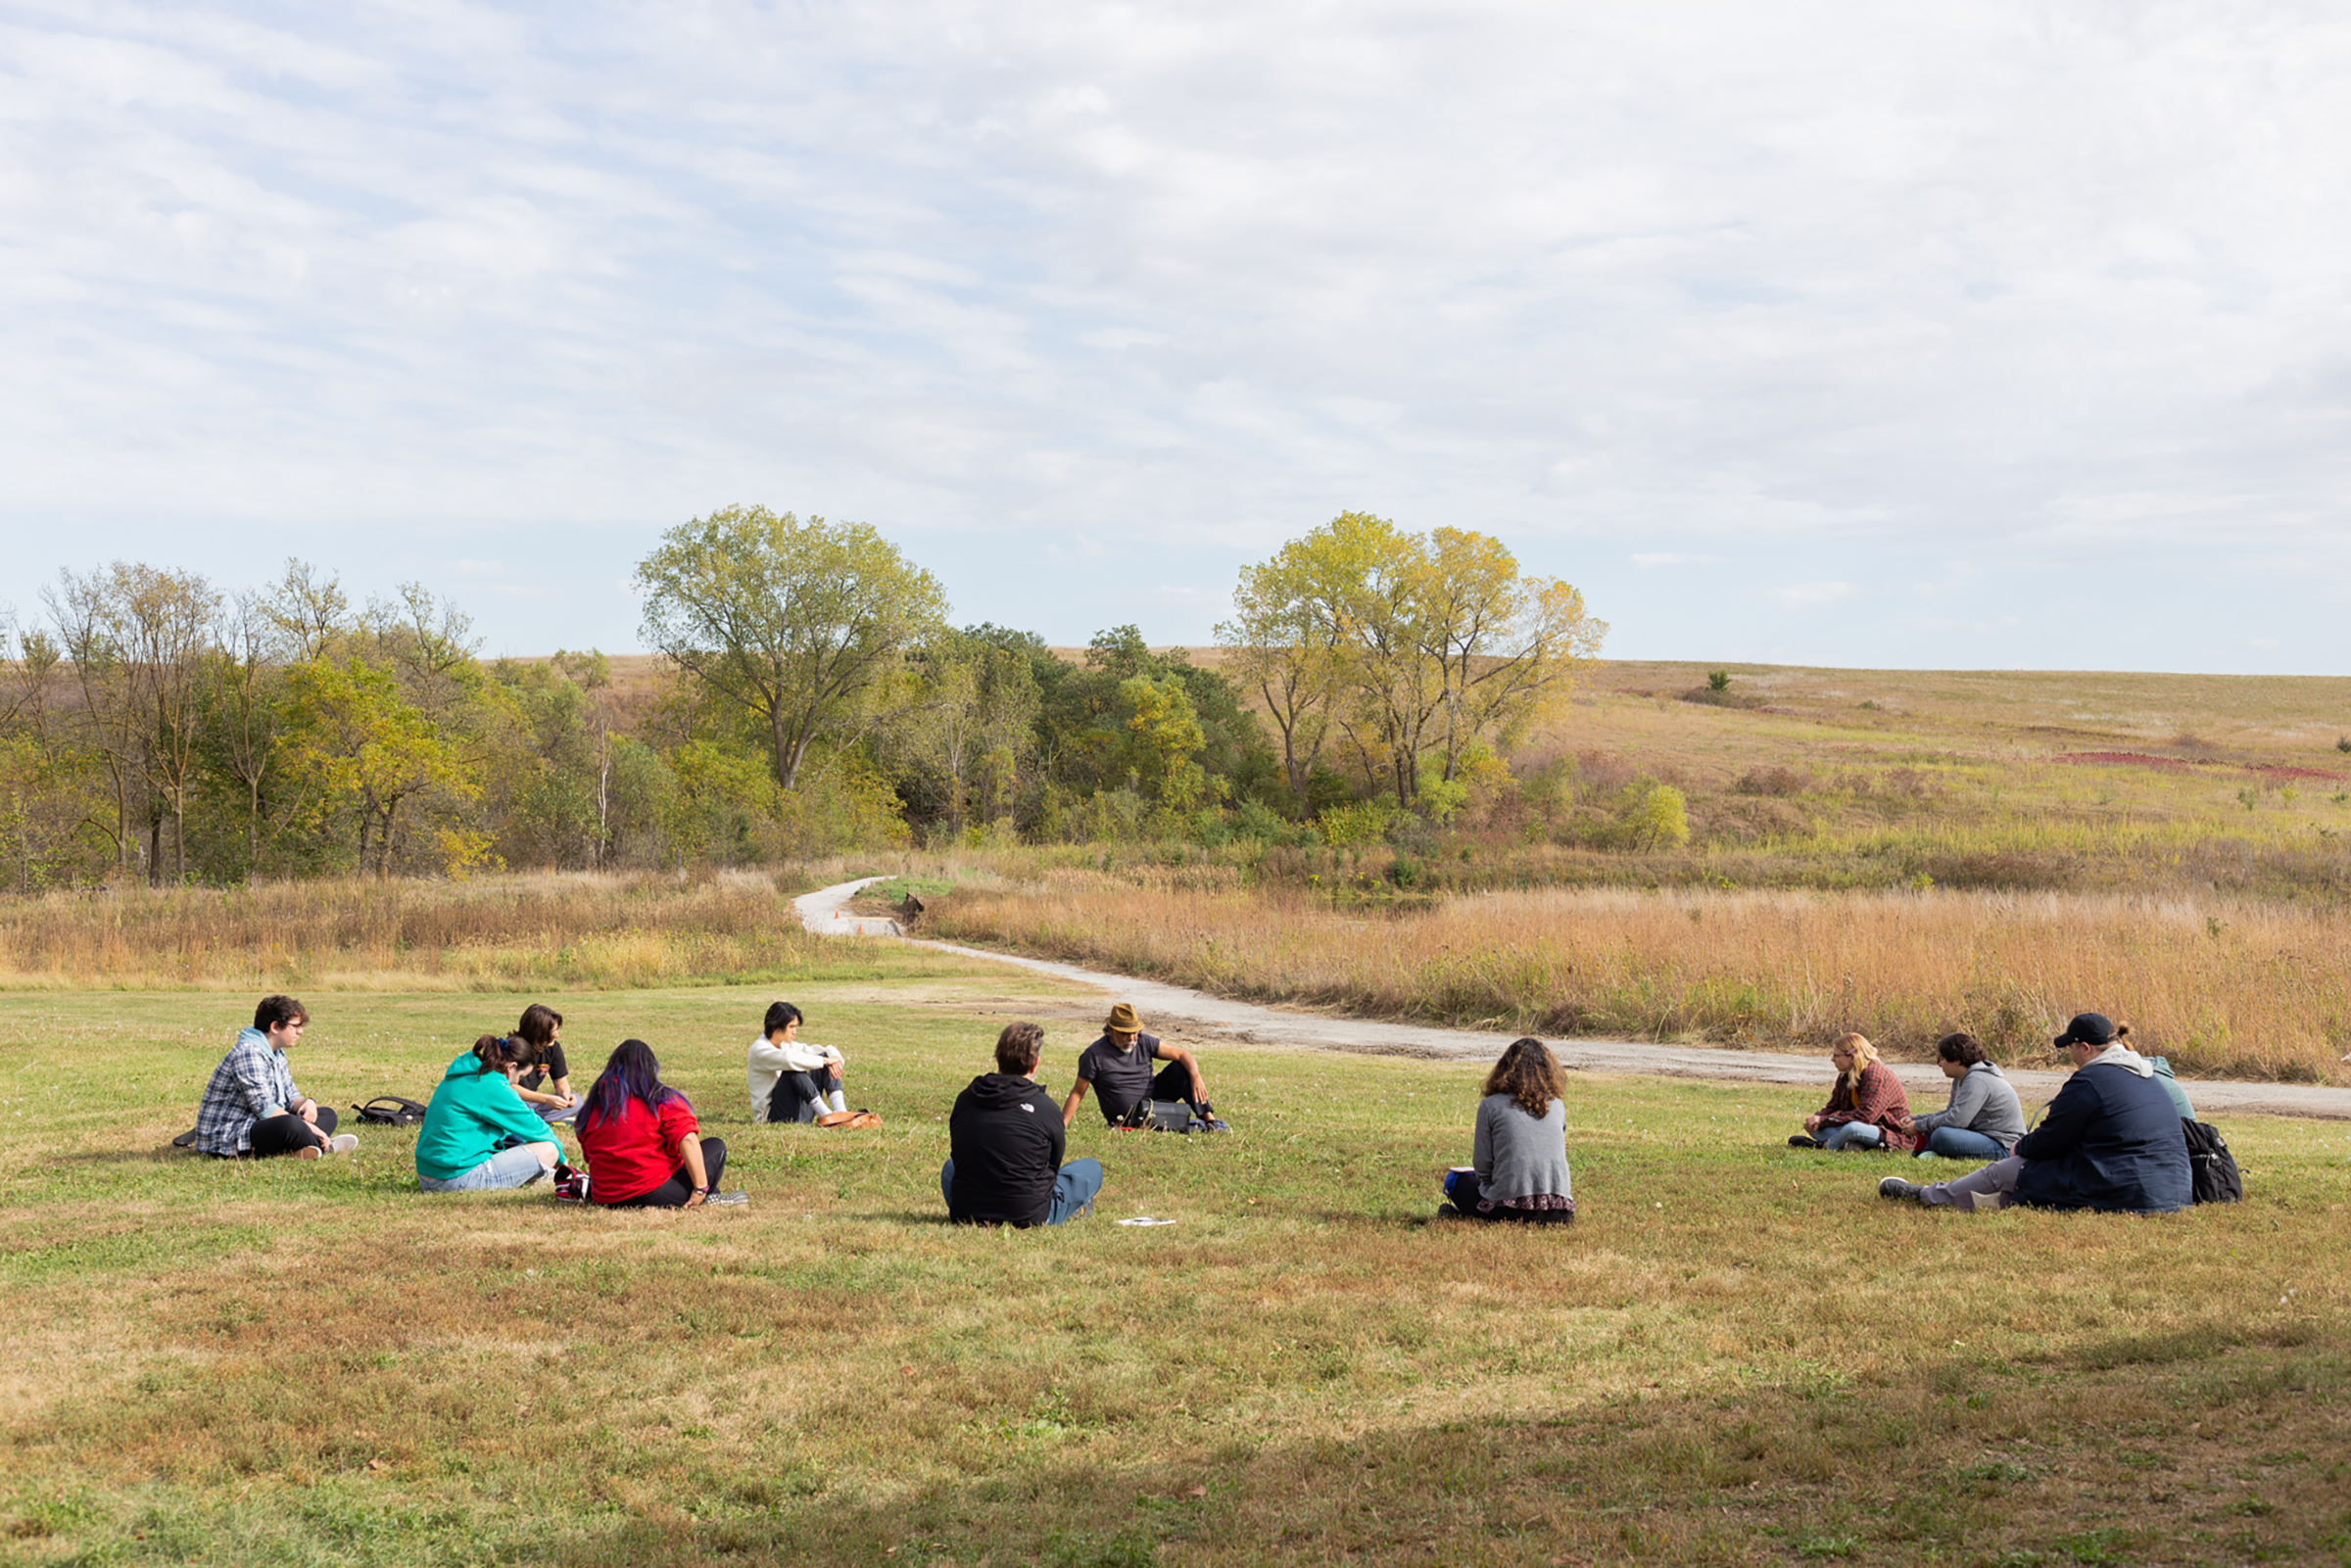 in Assistant Professor of Emerging Media Arts Jesse Reding Fleming’s Innovation Studio course Emergent Strategies for Regenerative Futures visited Audubon Spring Creek Prairie in October to help them contemplate nature. Photo by Eddy Aldana.